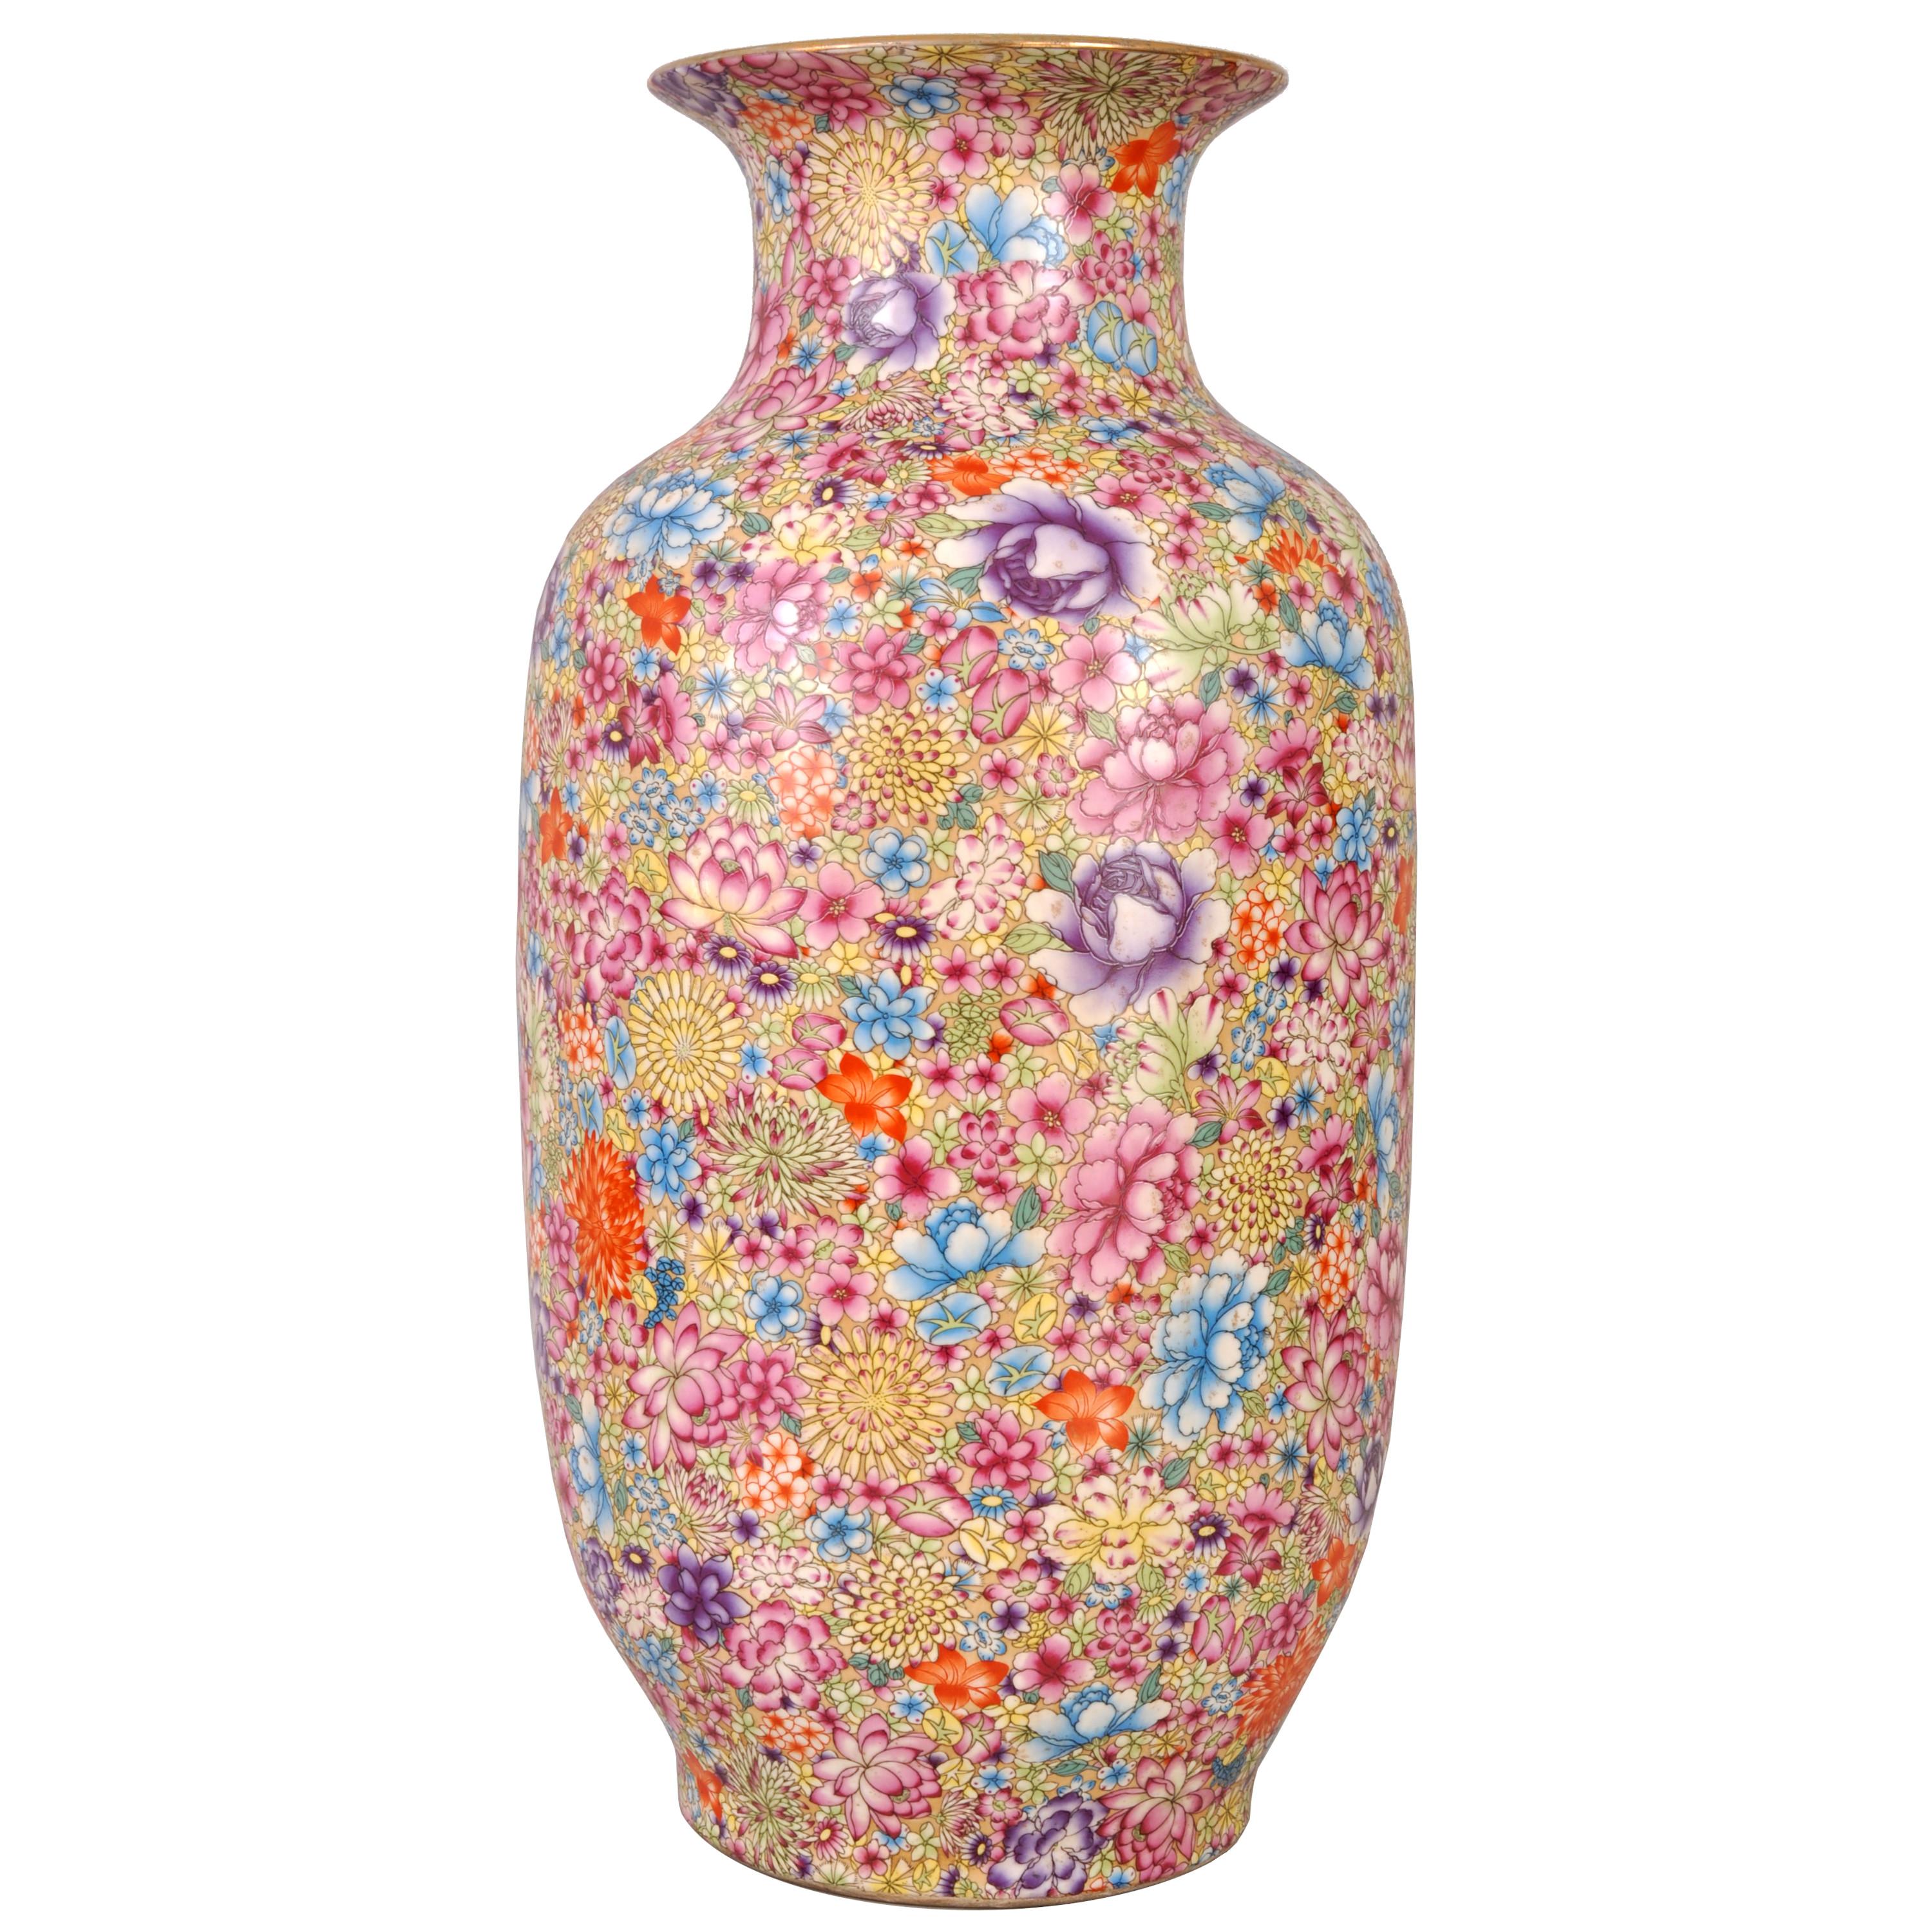 Chinese Export Monumental Antique Chinese Porcelain Qing Dynasty Thousand Flowers Vase, 1900